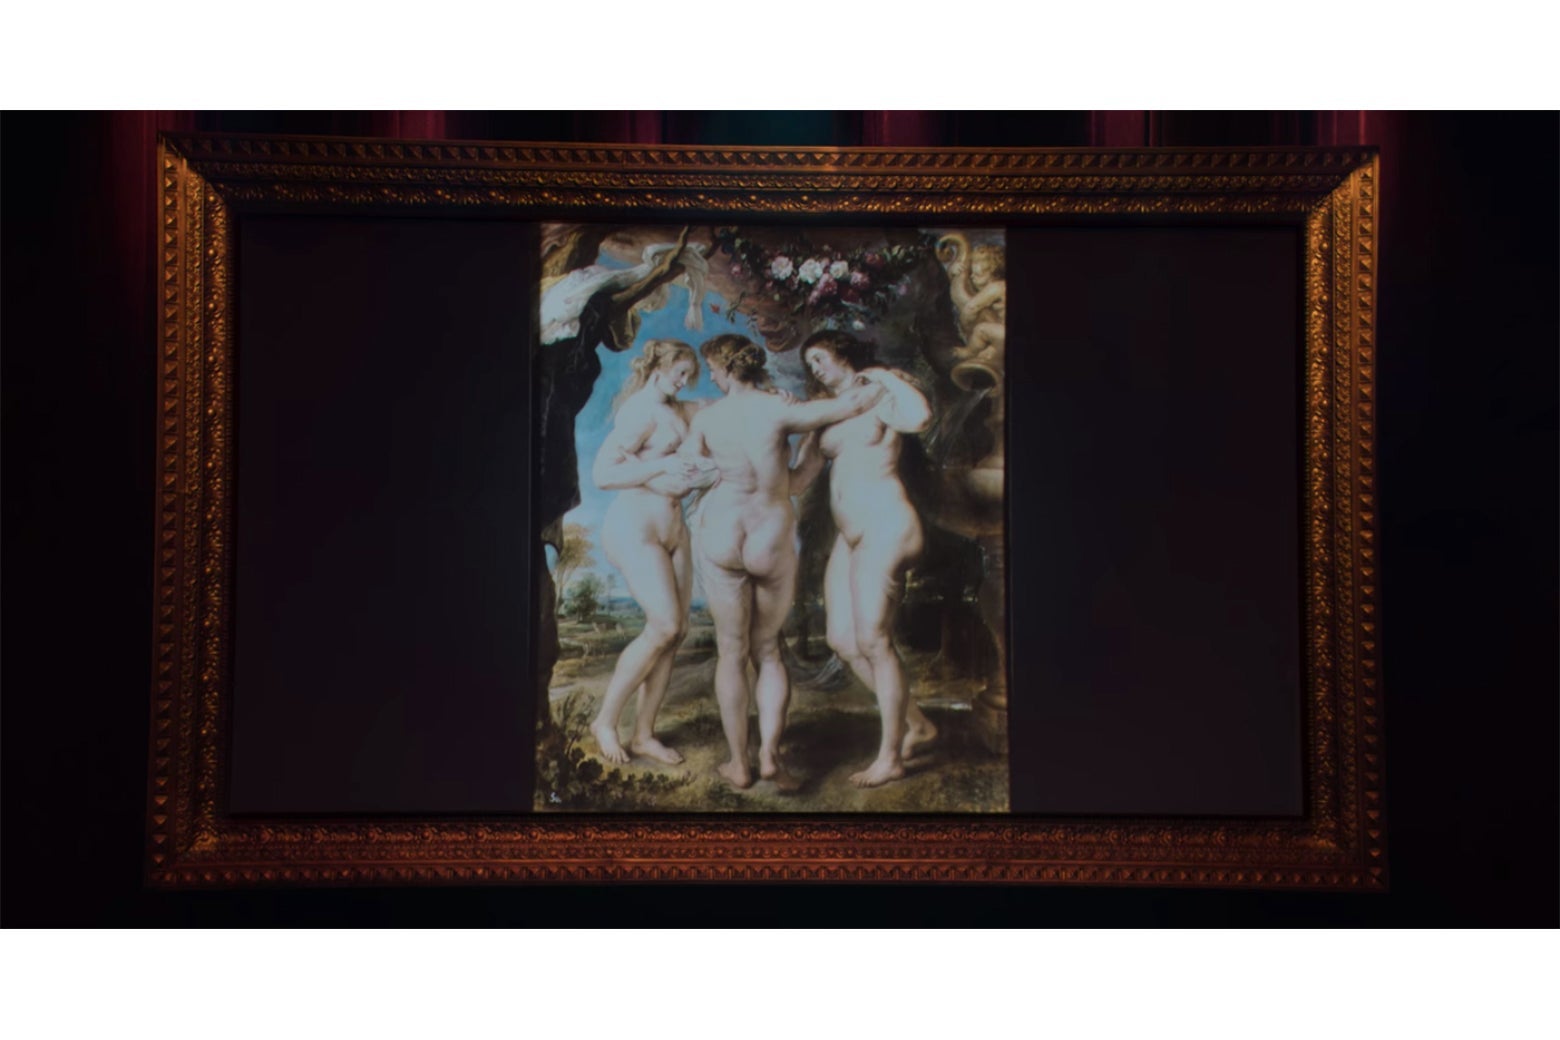 A projection screen showing Rubens' painting of the Three Graces, wrapped in an ornate frame.